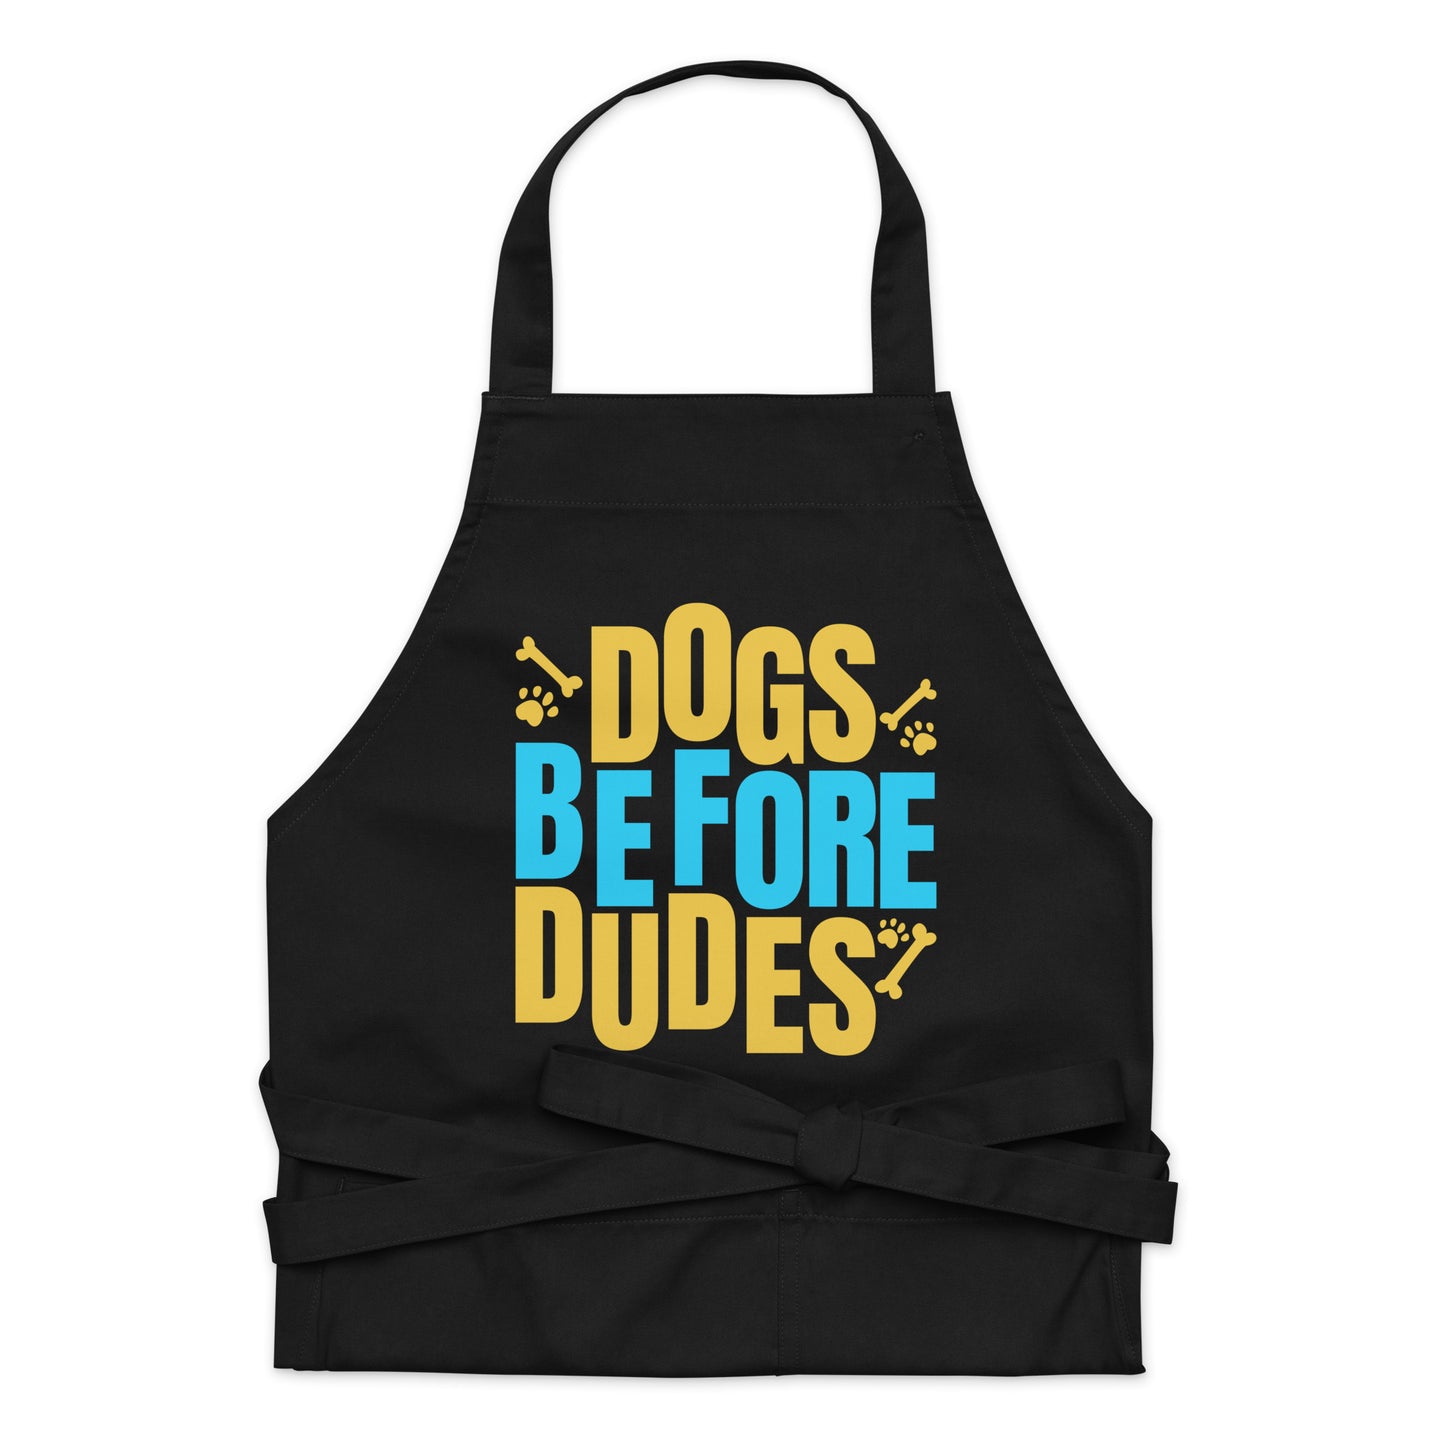 Dogs Before Dudes Organic cotton apron